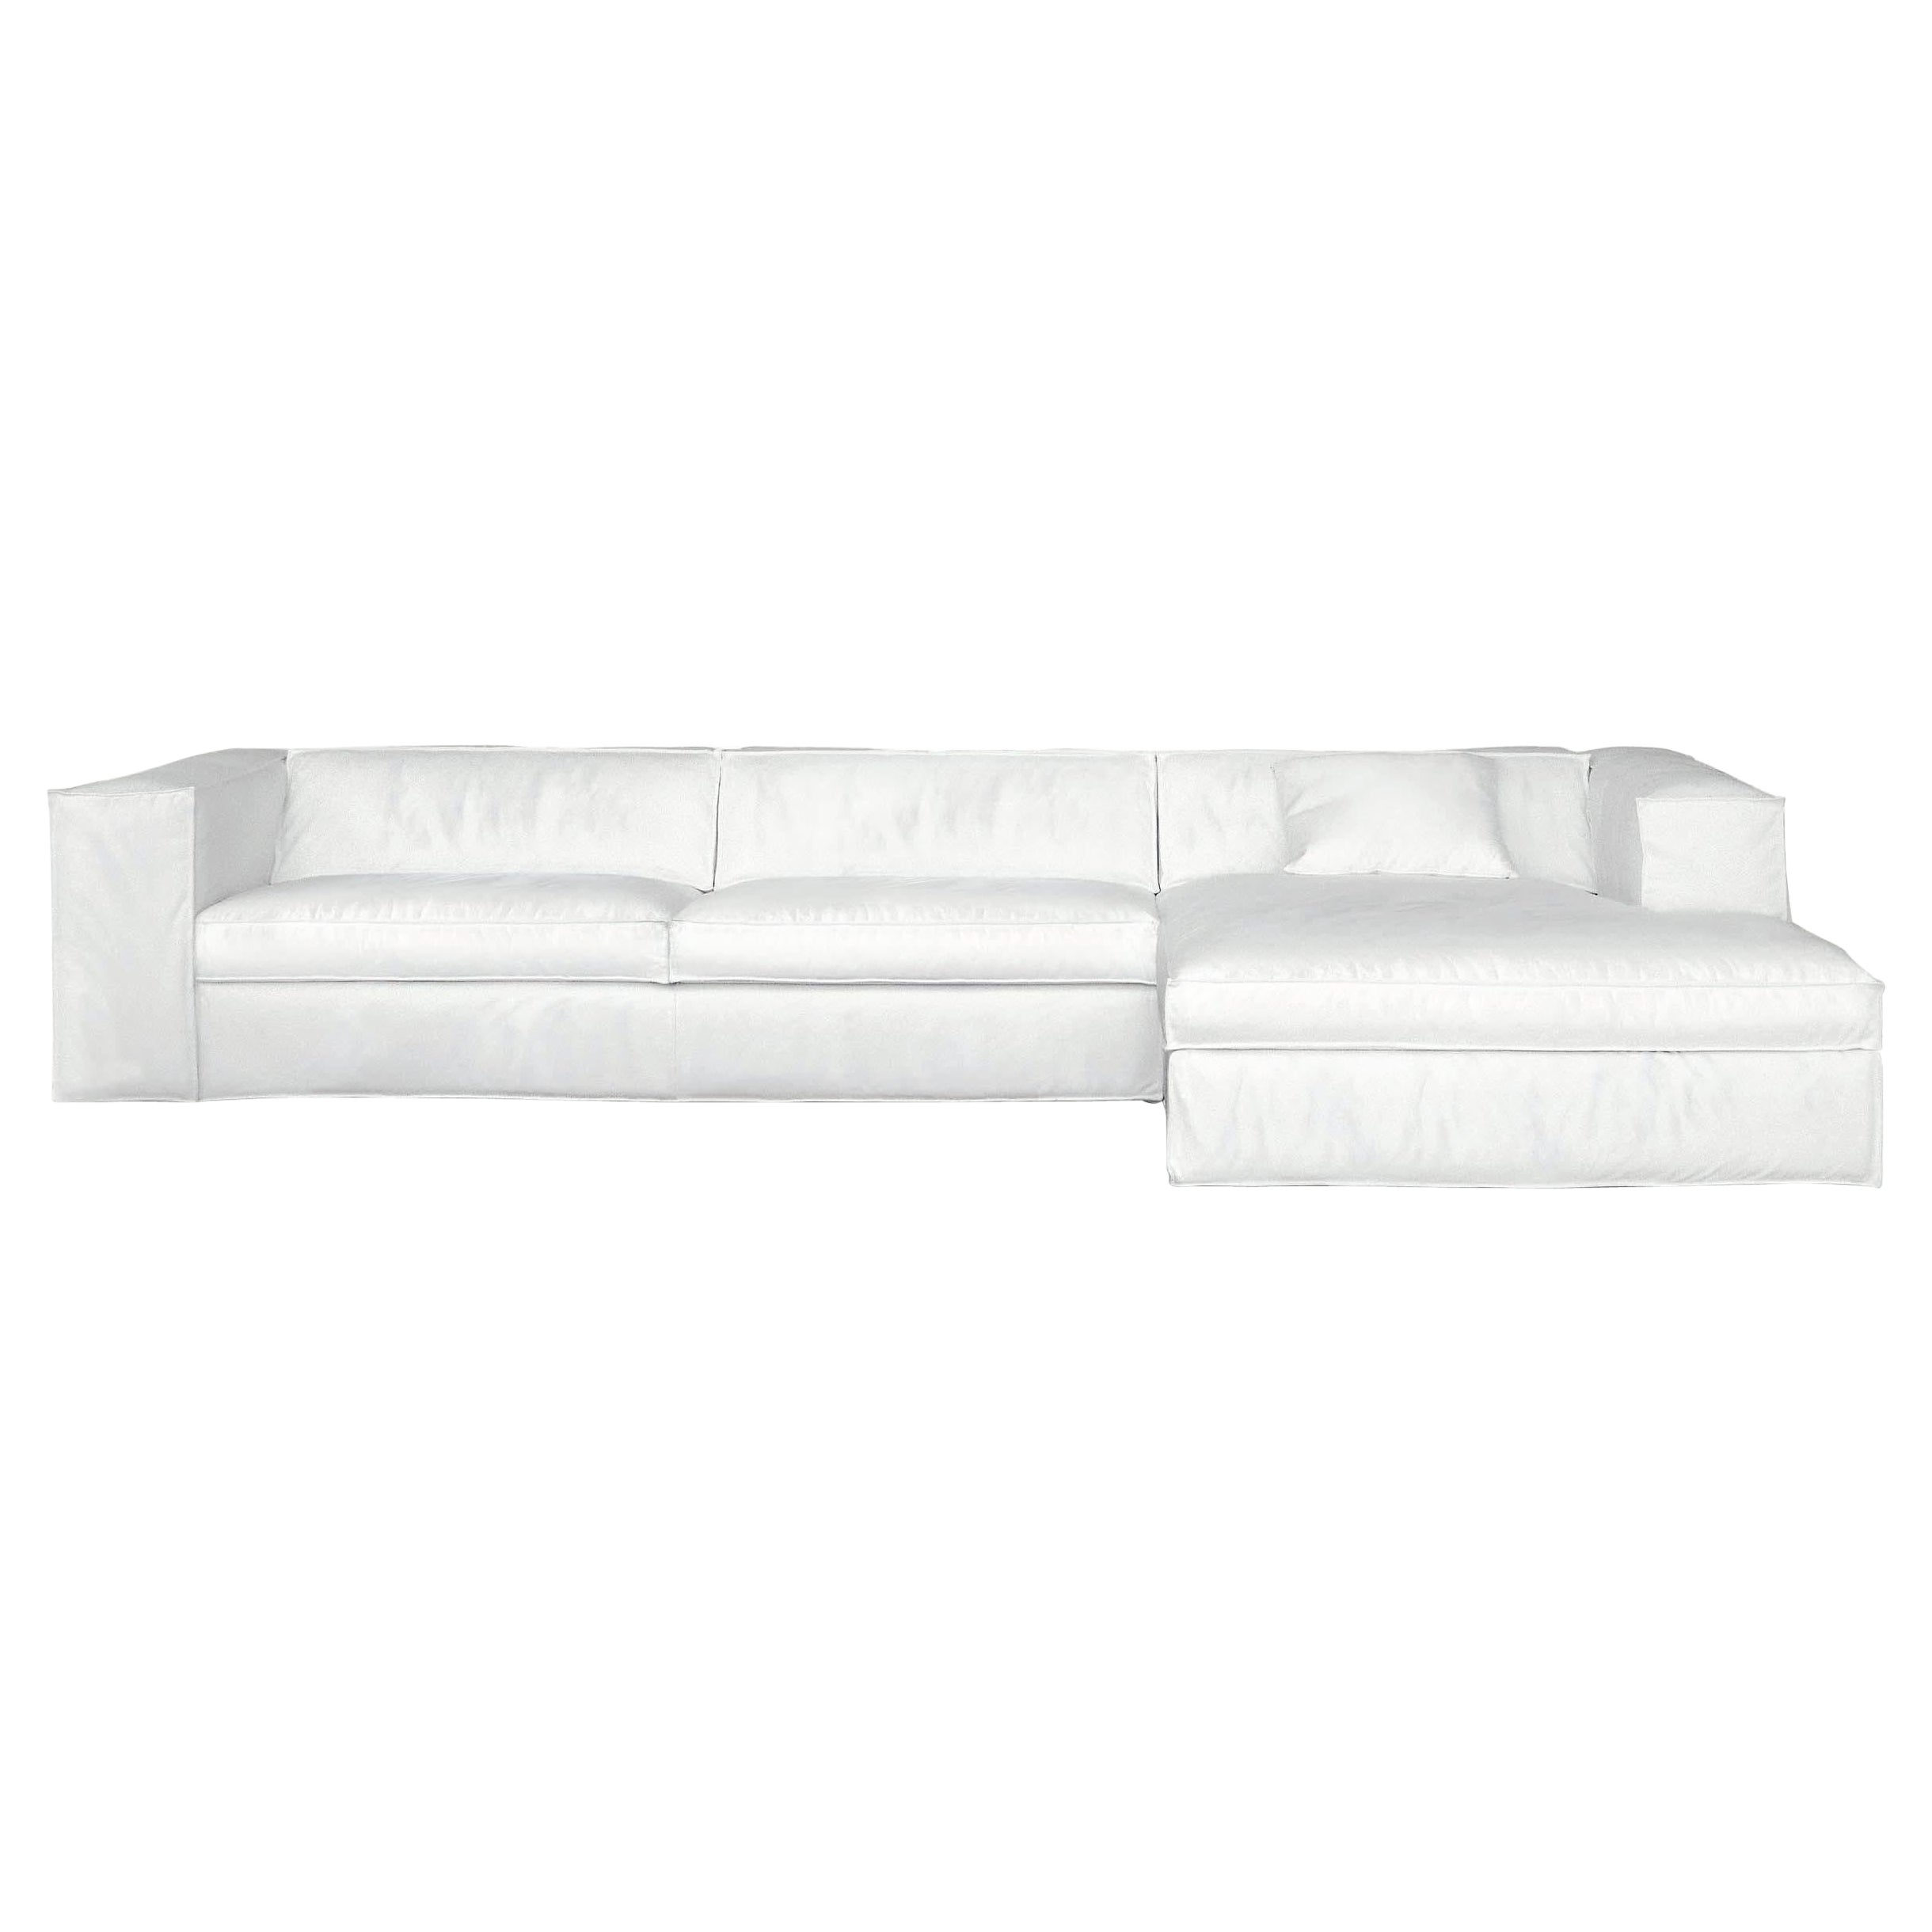 Up Extra Large Modular Sofa in Lusso White Upholstery by Giuseppe Viganò For Sale